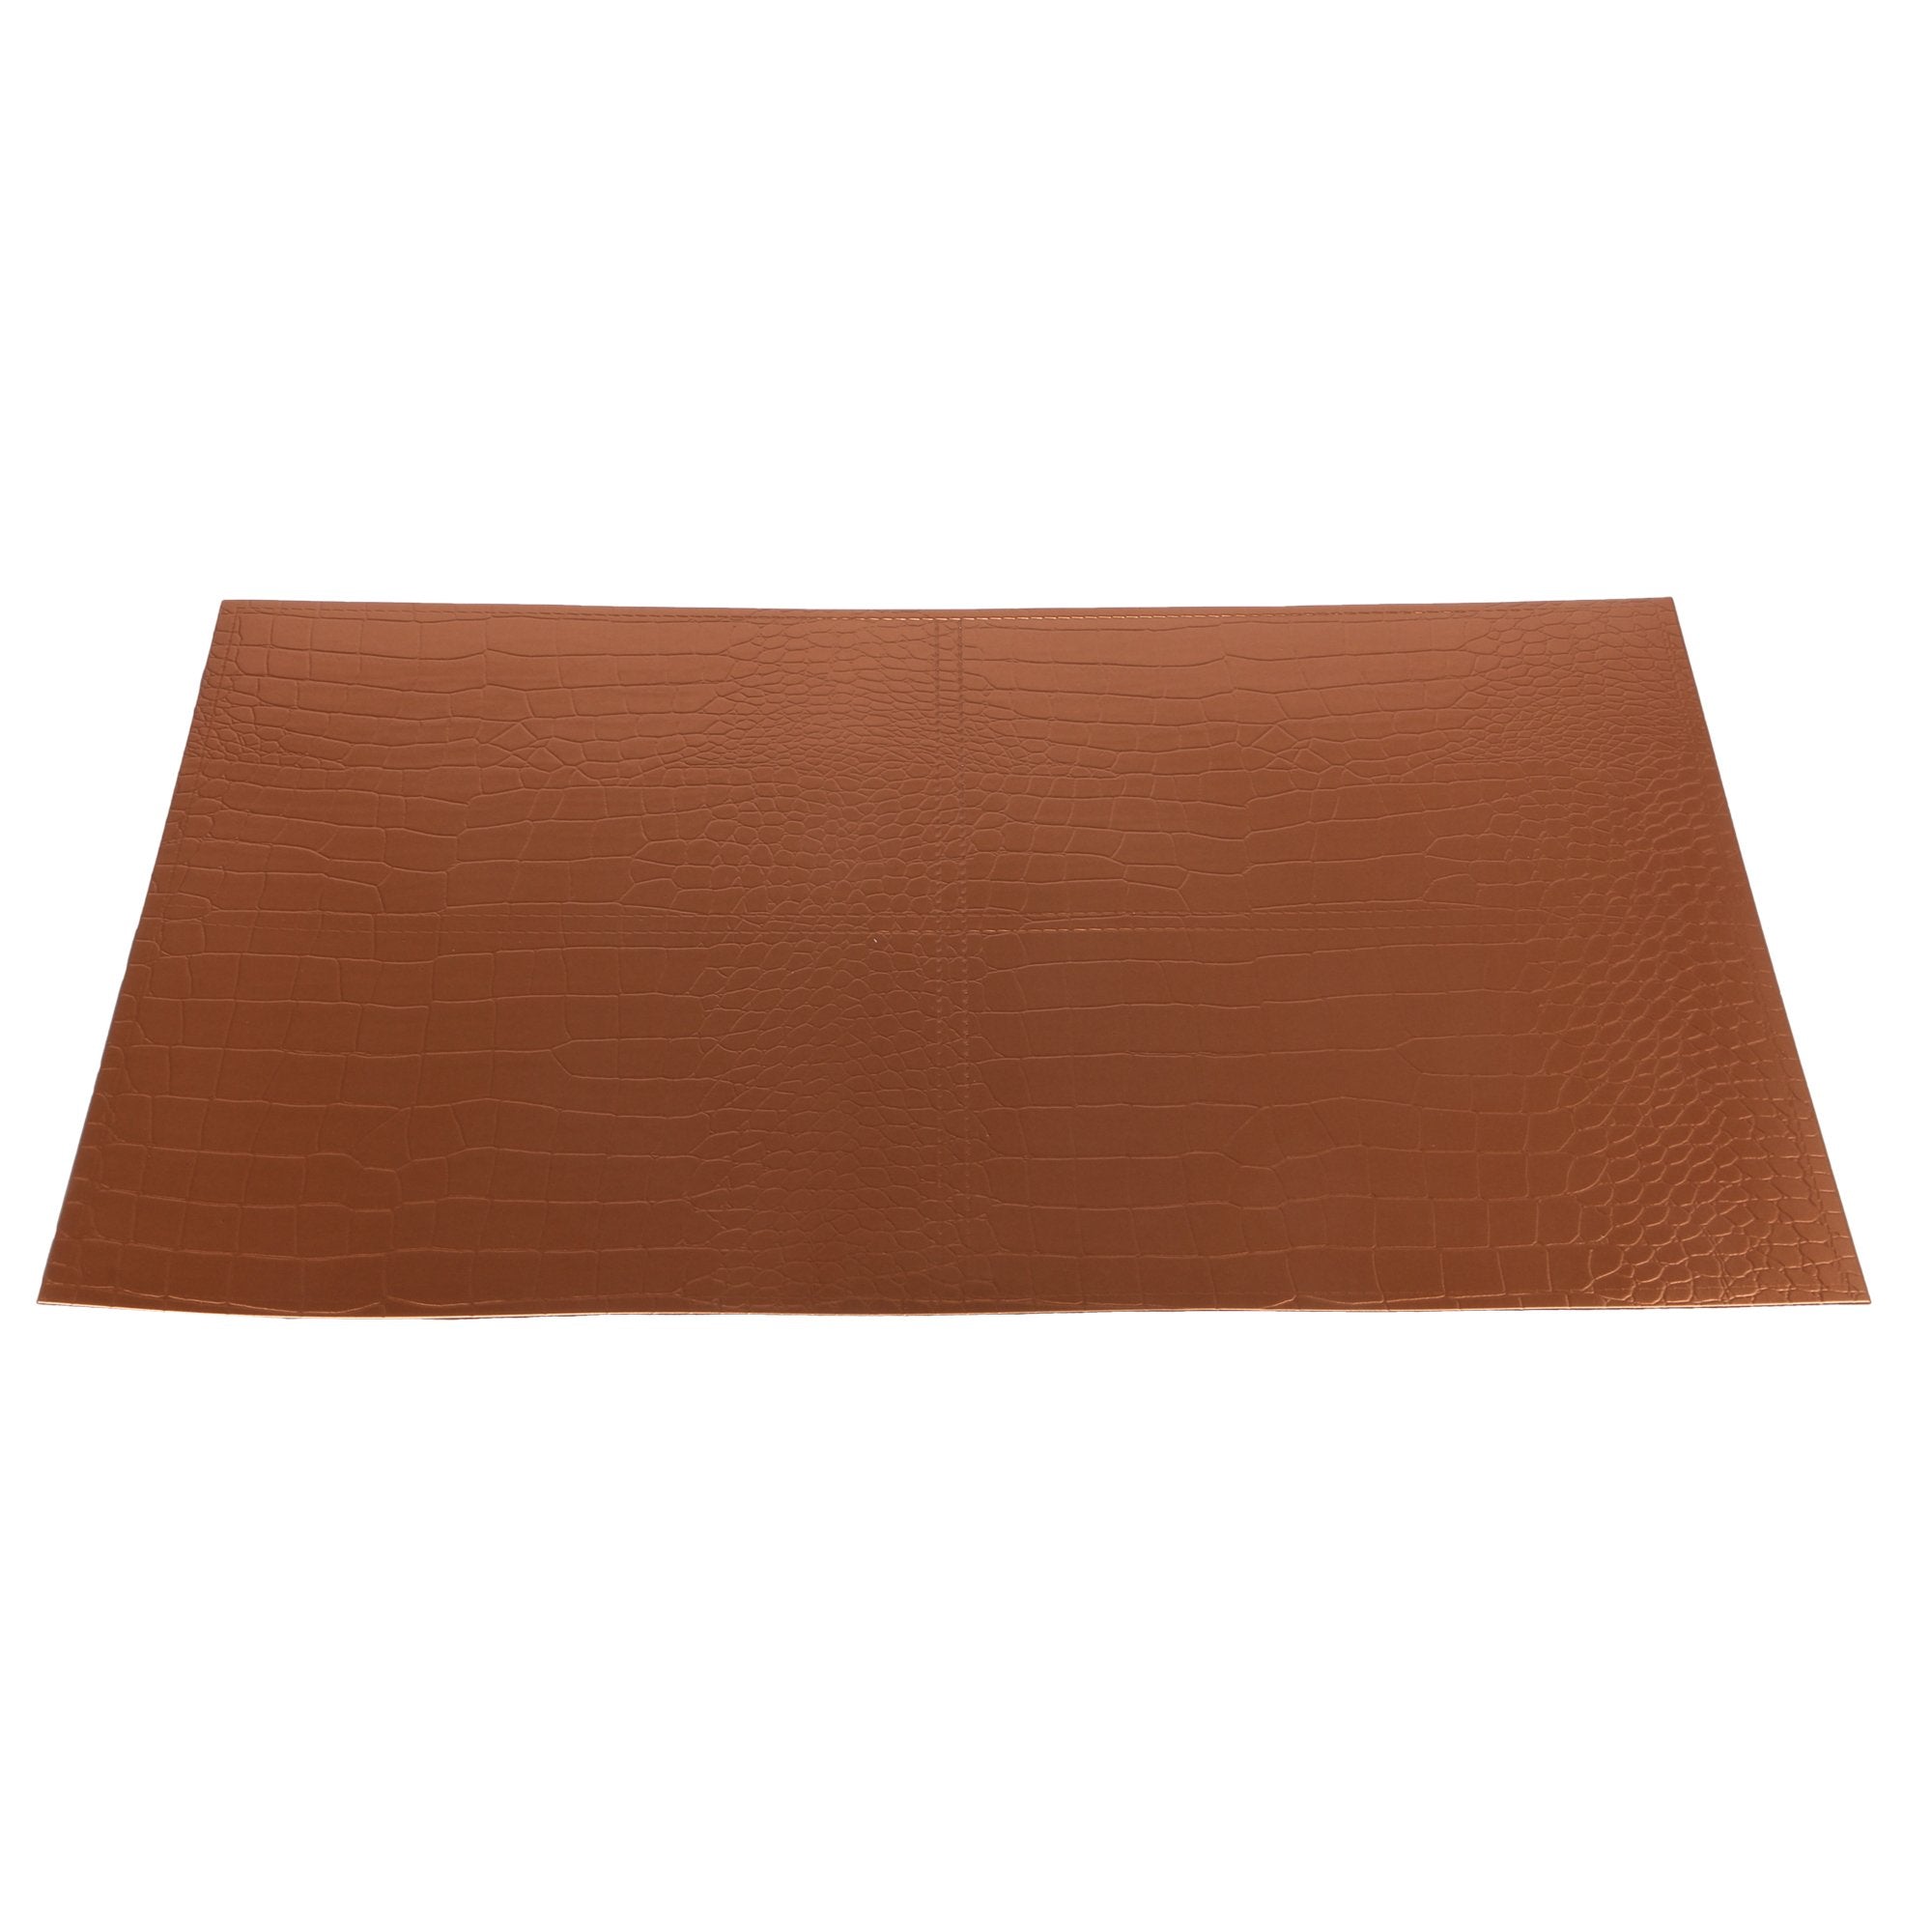 Rectangular Set of 6 pcs PU Leather Solid Place Mats, Best for Dining Table/Bedside Table, Center Table